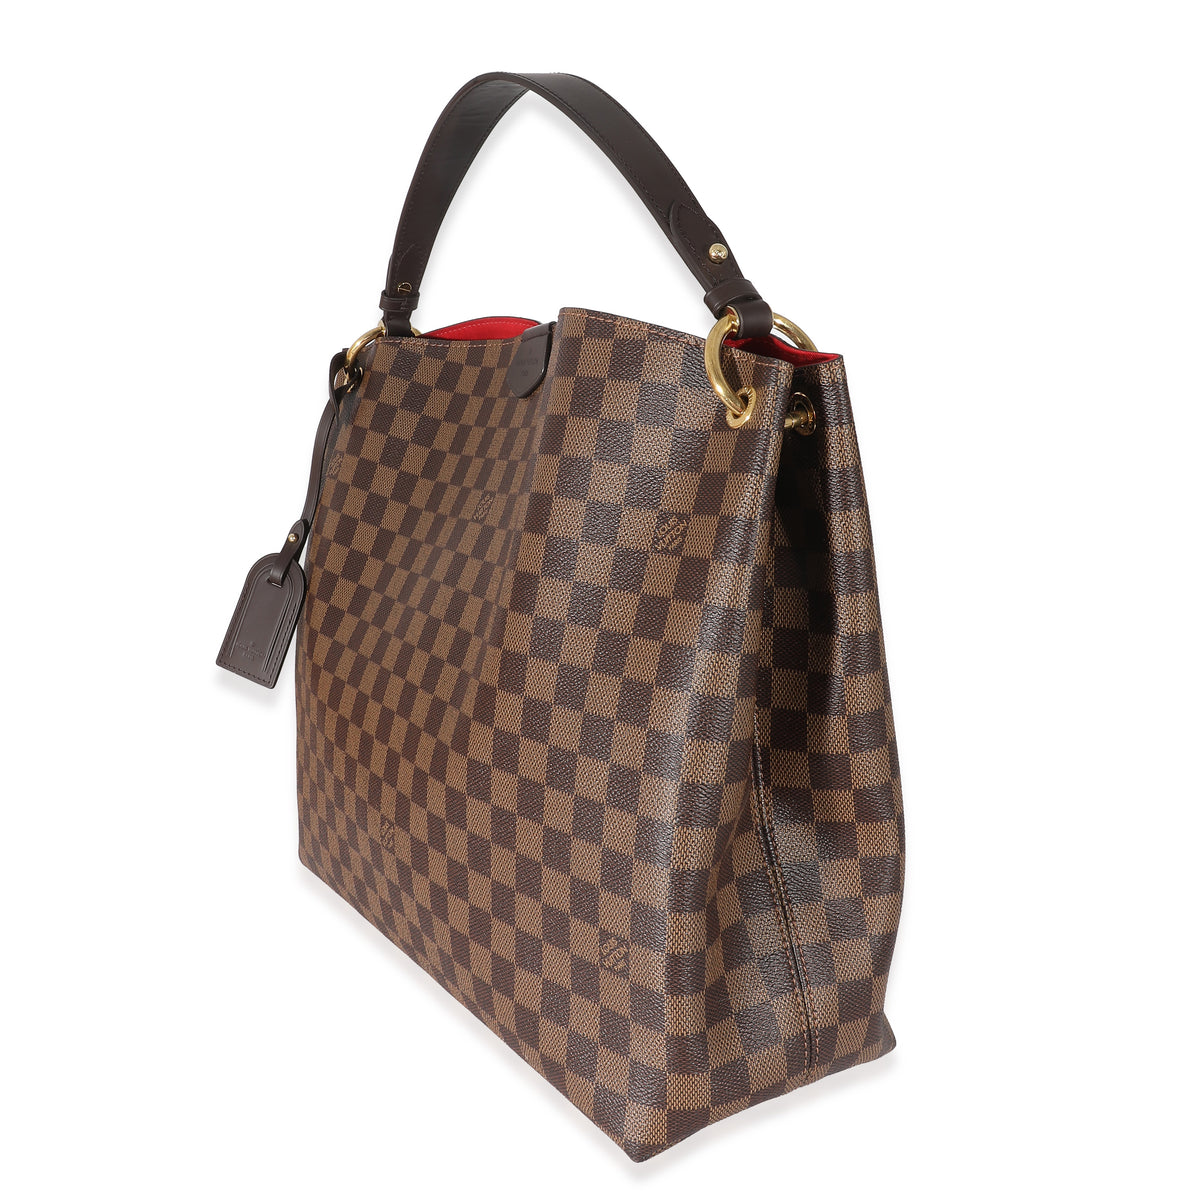 Louis Vuitton White And Blue Damier Azur Coated Canvas Graceful MM